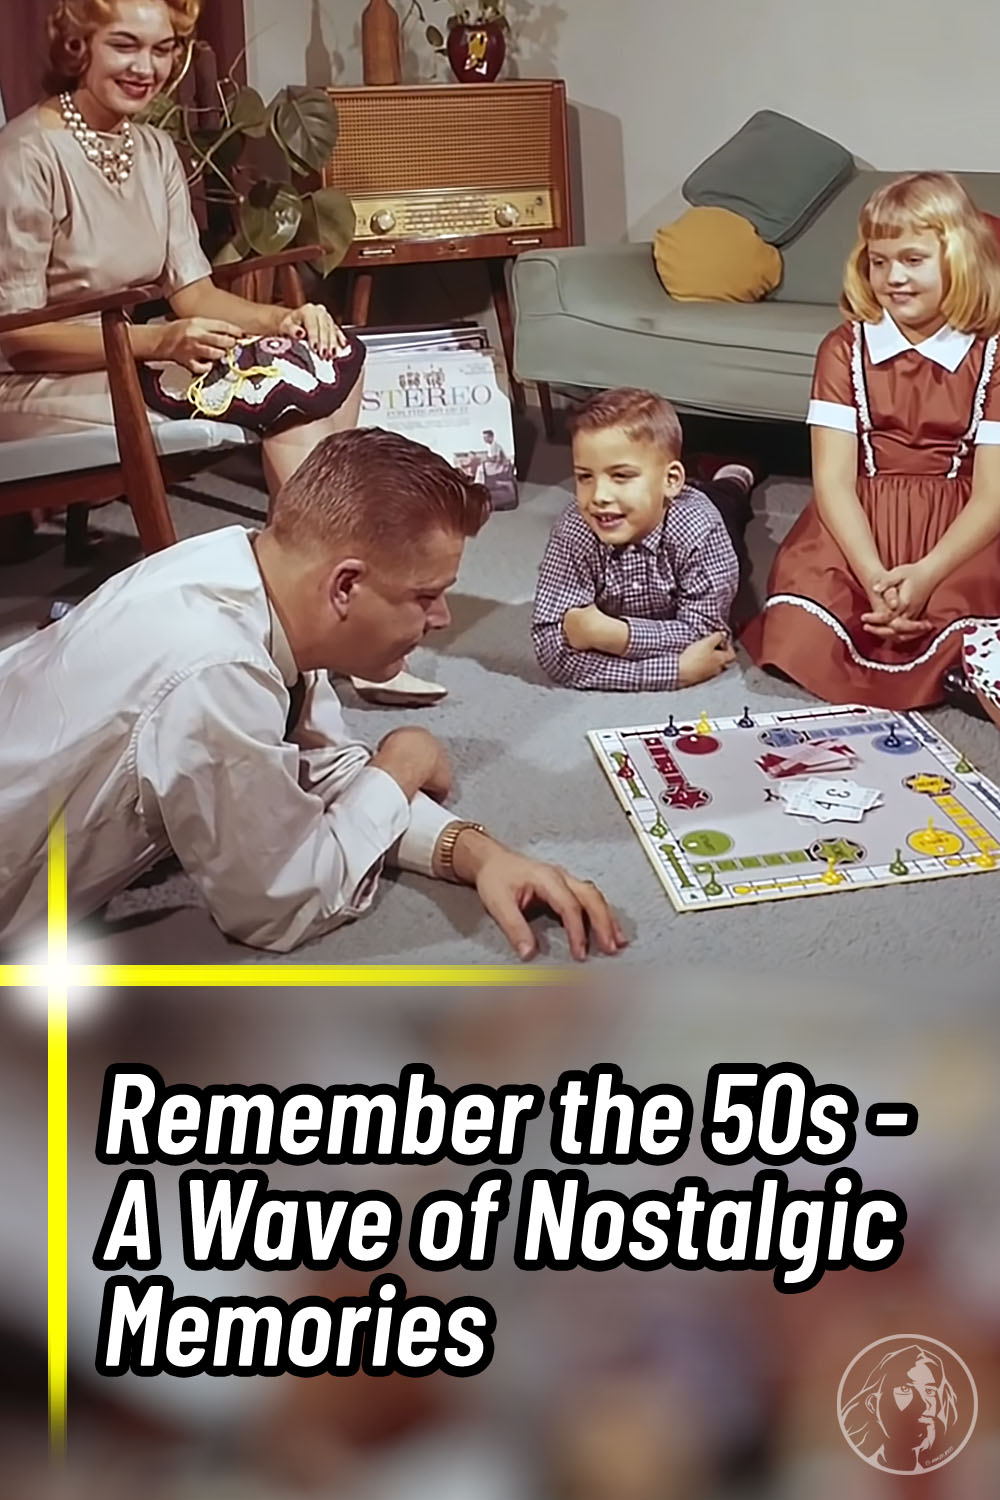 Remember the 50s - A Wave of Nostalgic Memories